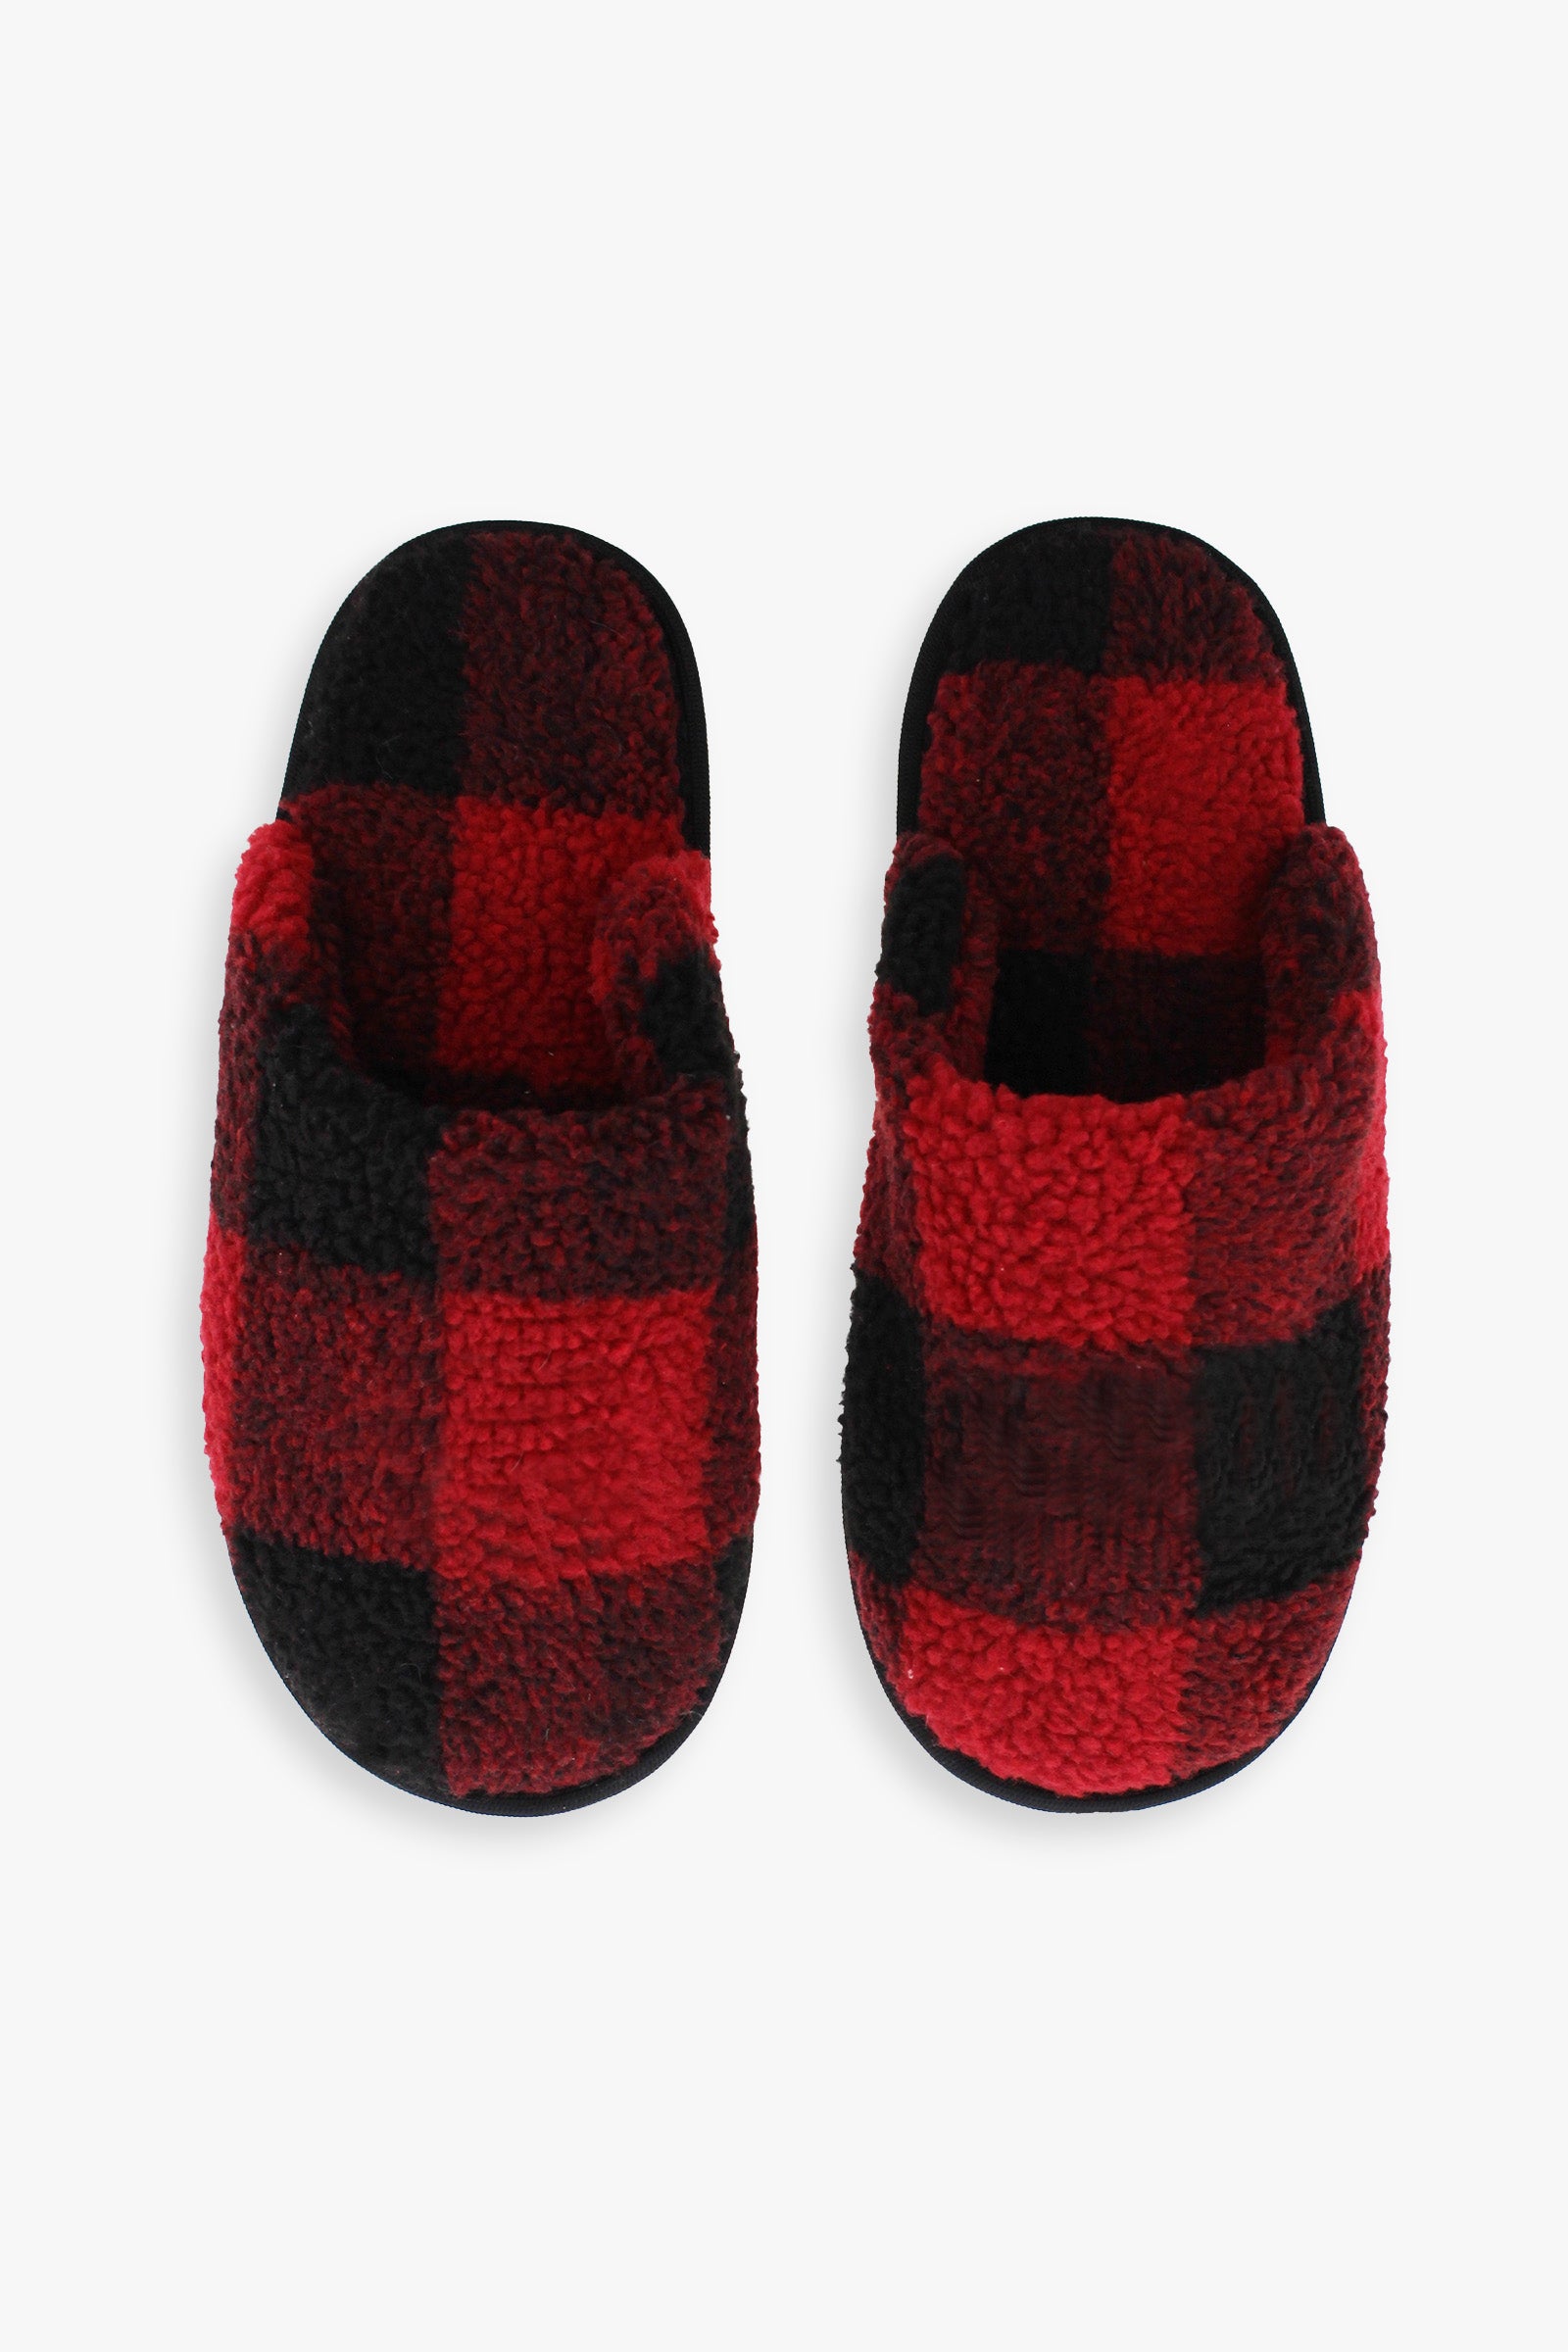 Great Northern Buffalo Plaid Ladies Cabin Slippers